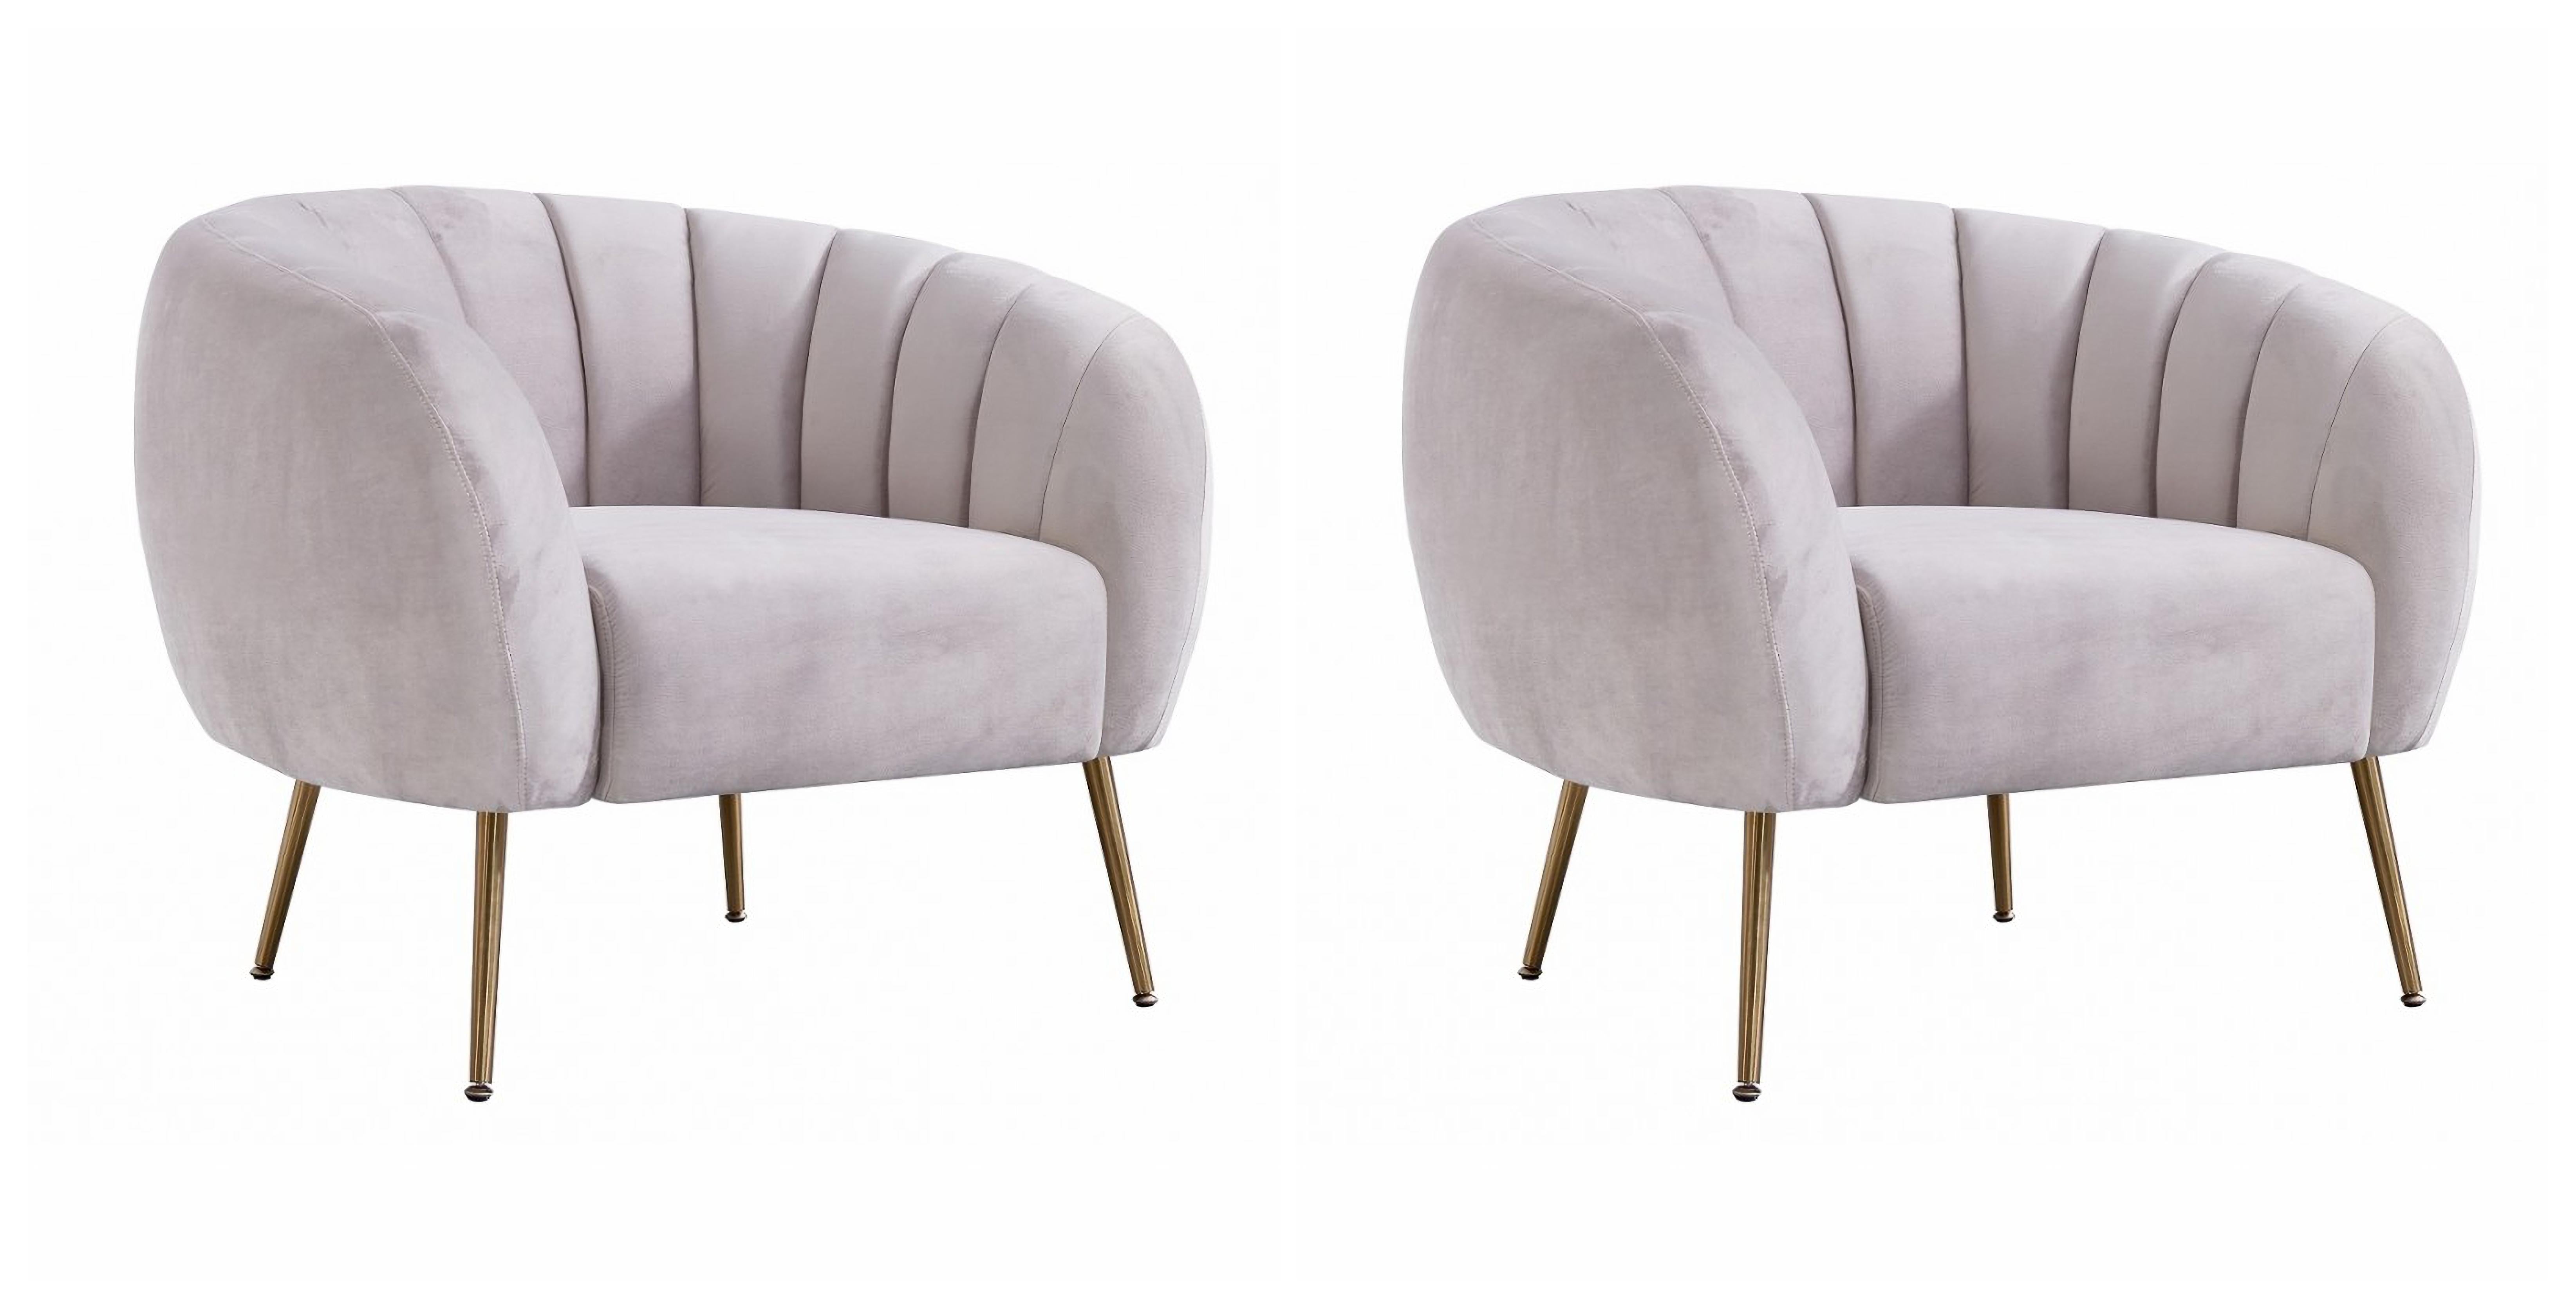 Pair of new velvet upholstered armchairs

Data sheet:

-Design armchair

-Made with solid wooden structure.

-High-density polyurethane foam.

-Upholstered in gray 25 velvet fabric

-Metallic legs with gold finish

-2 and 3 seater